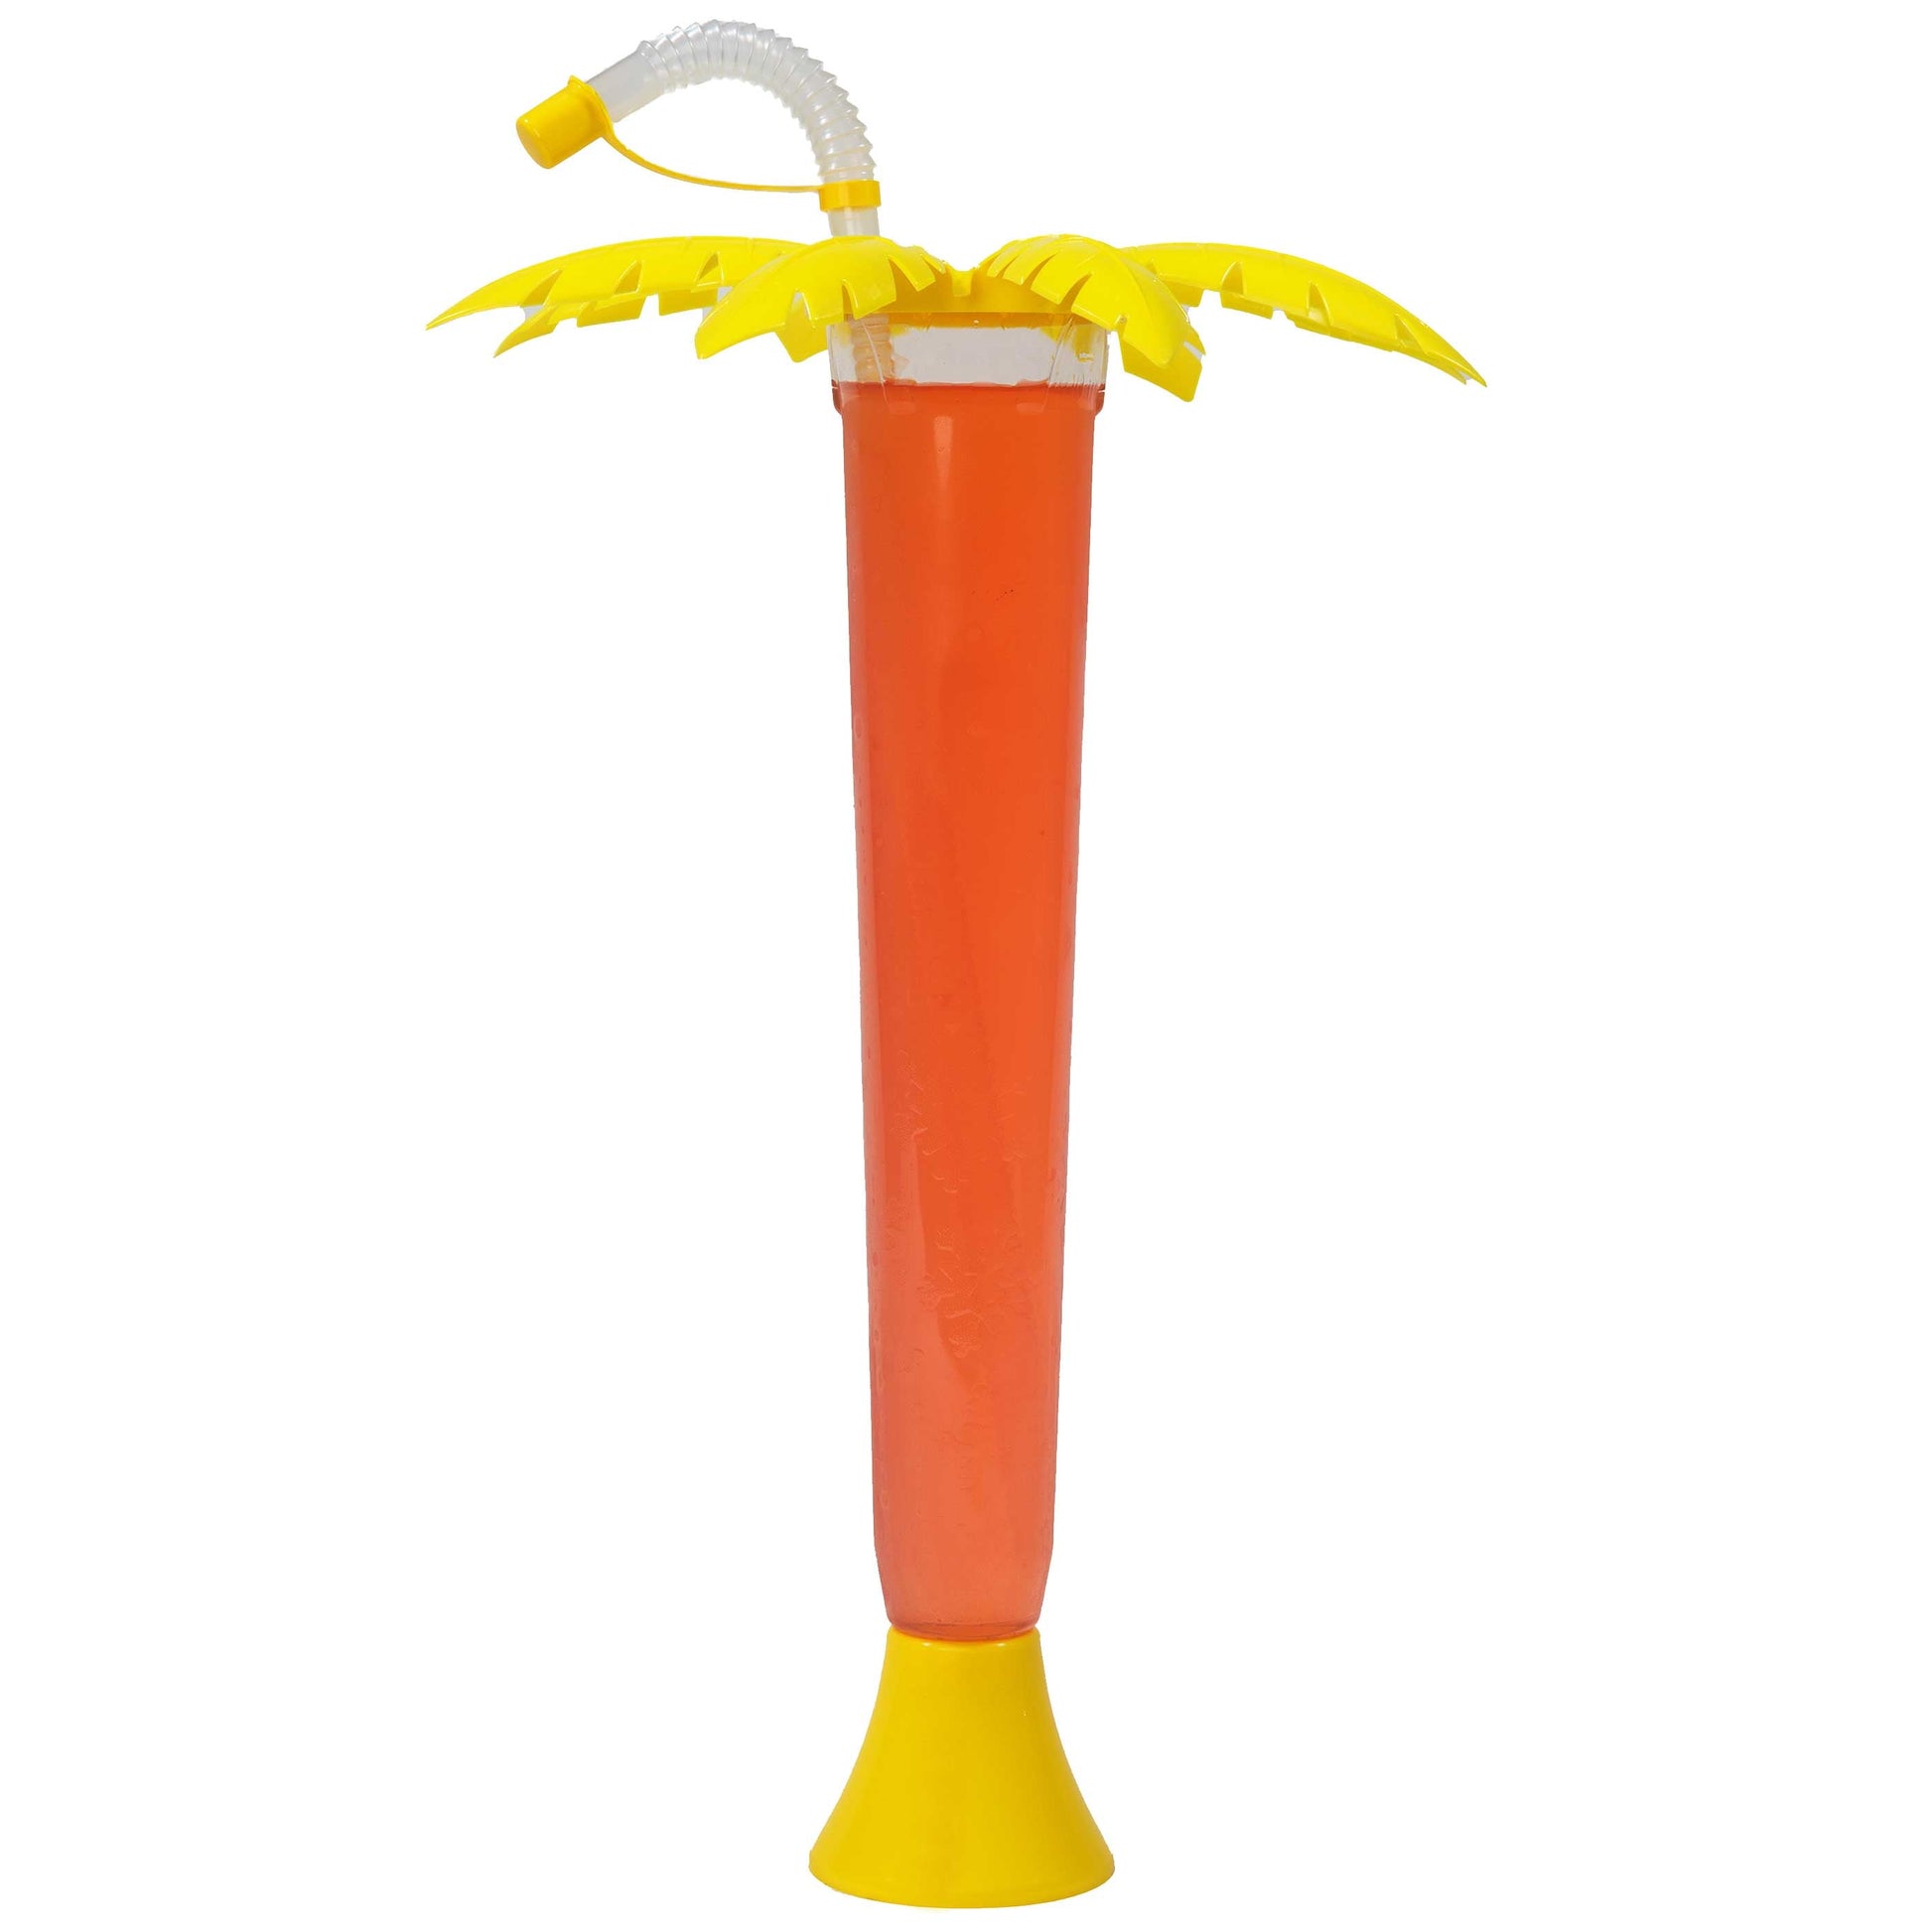 Sweet World USA Yard Cups 108 Palm Tree Luau Yard Cups (108 cups) - for Margaritas, Cold Drinks, Frozen Drinks, Kids Parties - 14 oz. (400 ml) - Yellow Palm cups with lids and straws